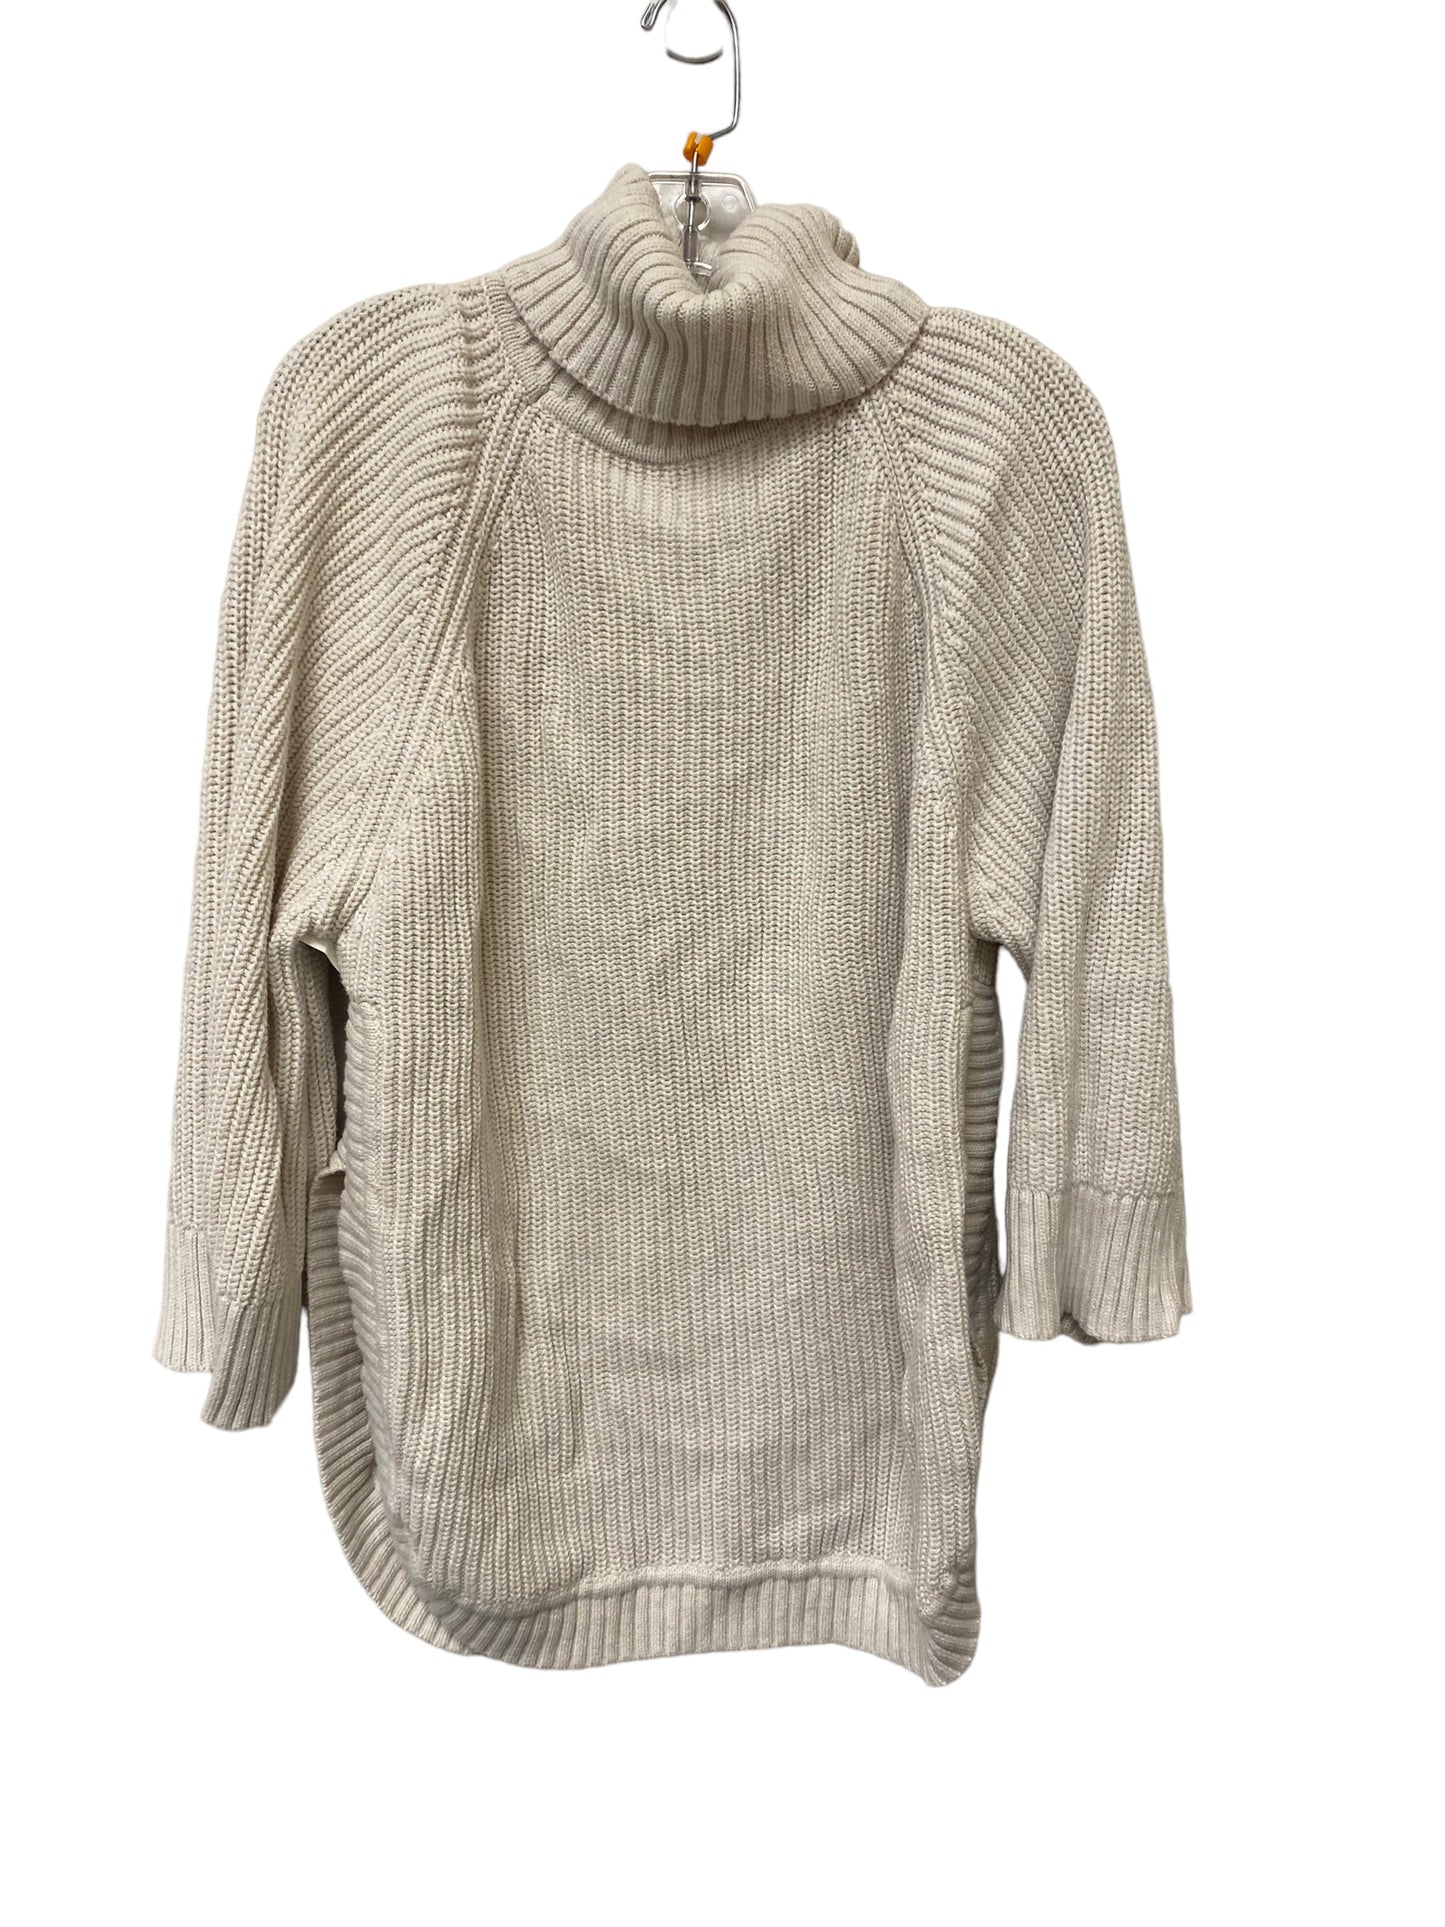 Sweater By Ugg  Size: L